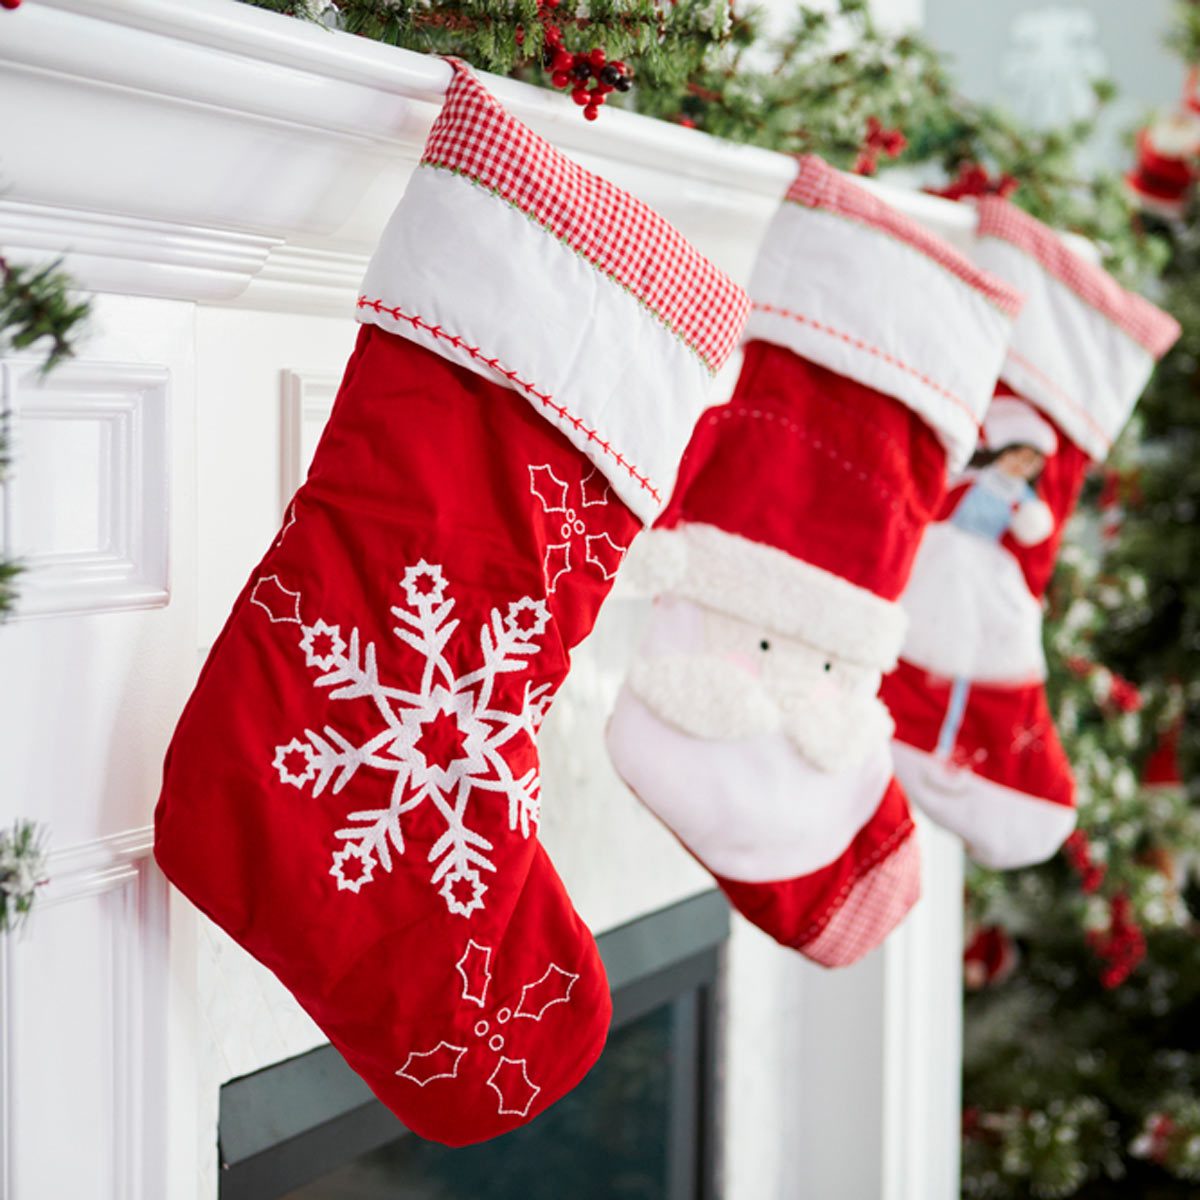 12 Quirky Christmas Traditions You Should Try | Famliy Handyman